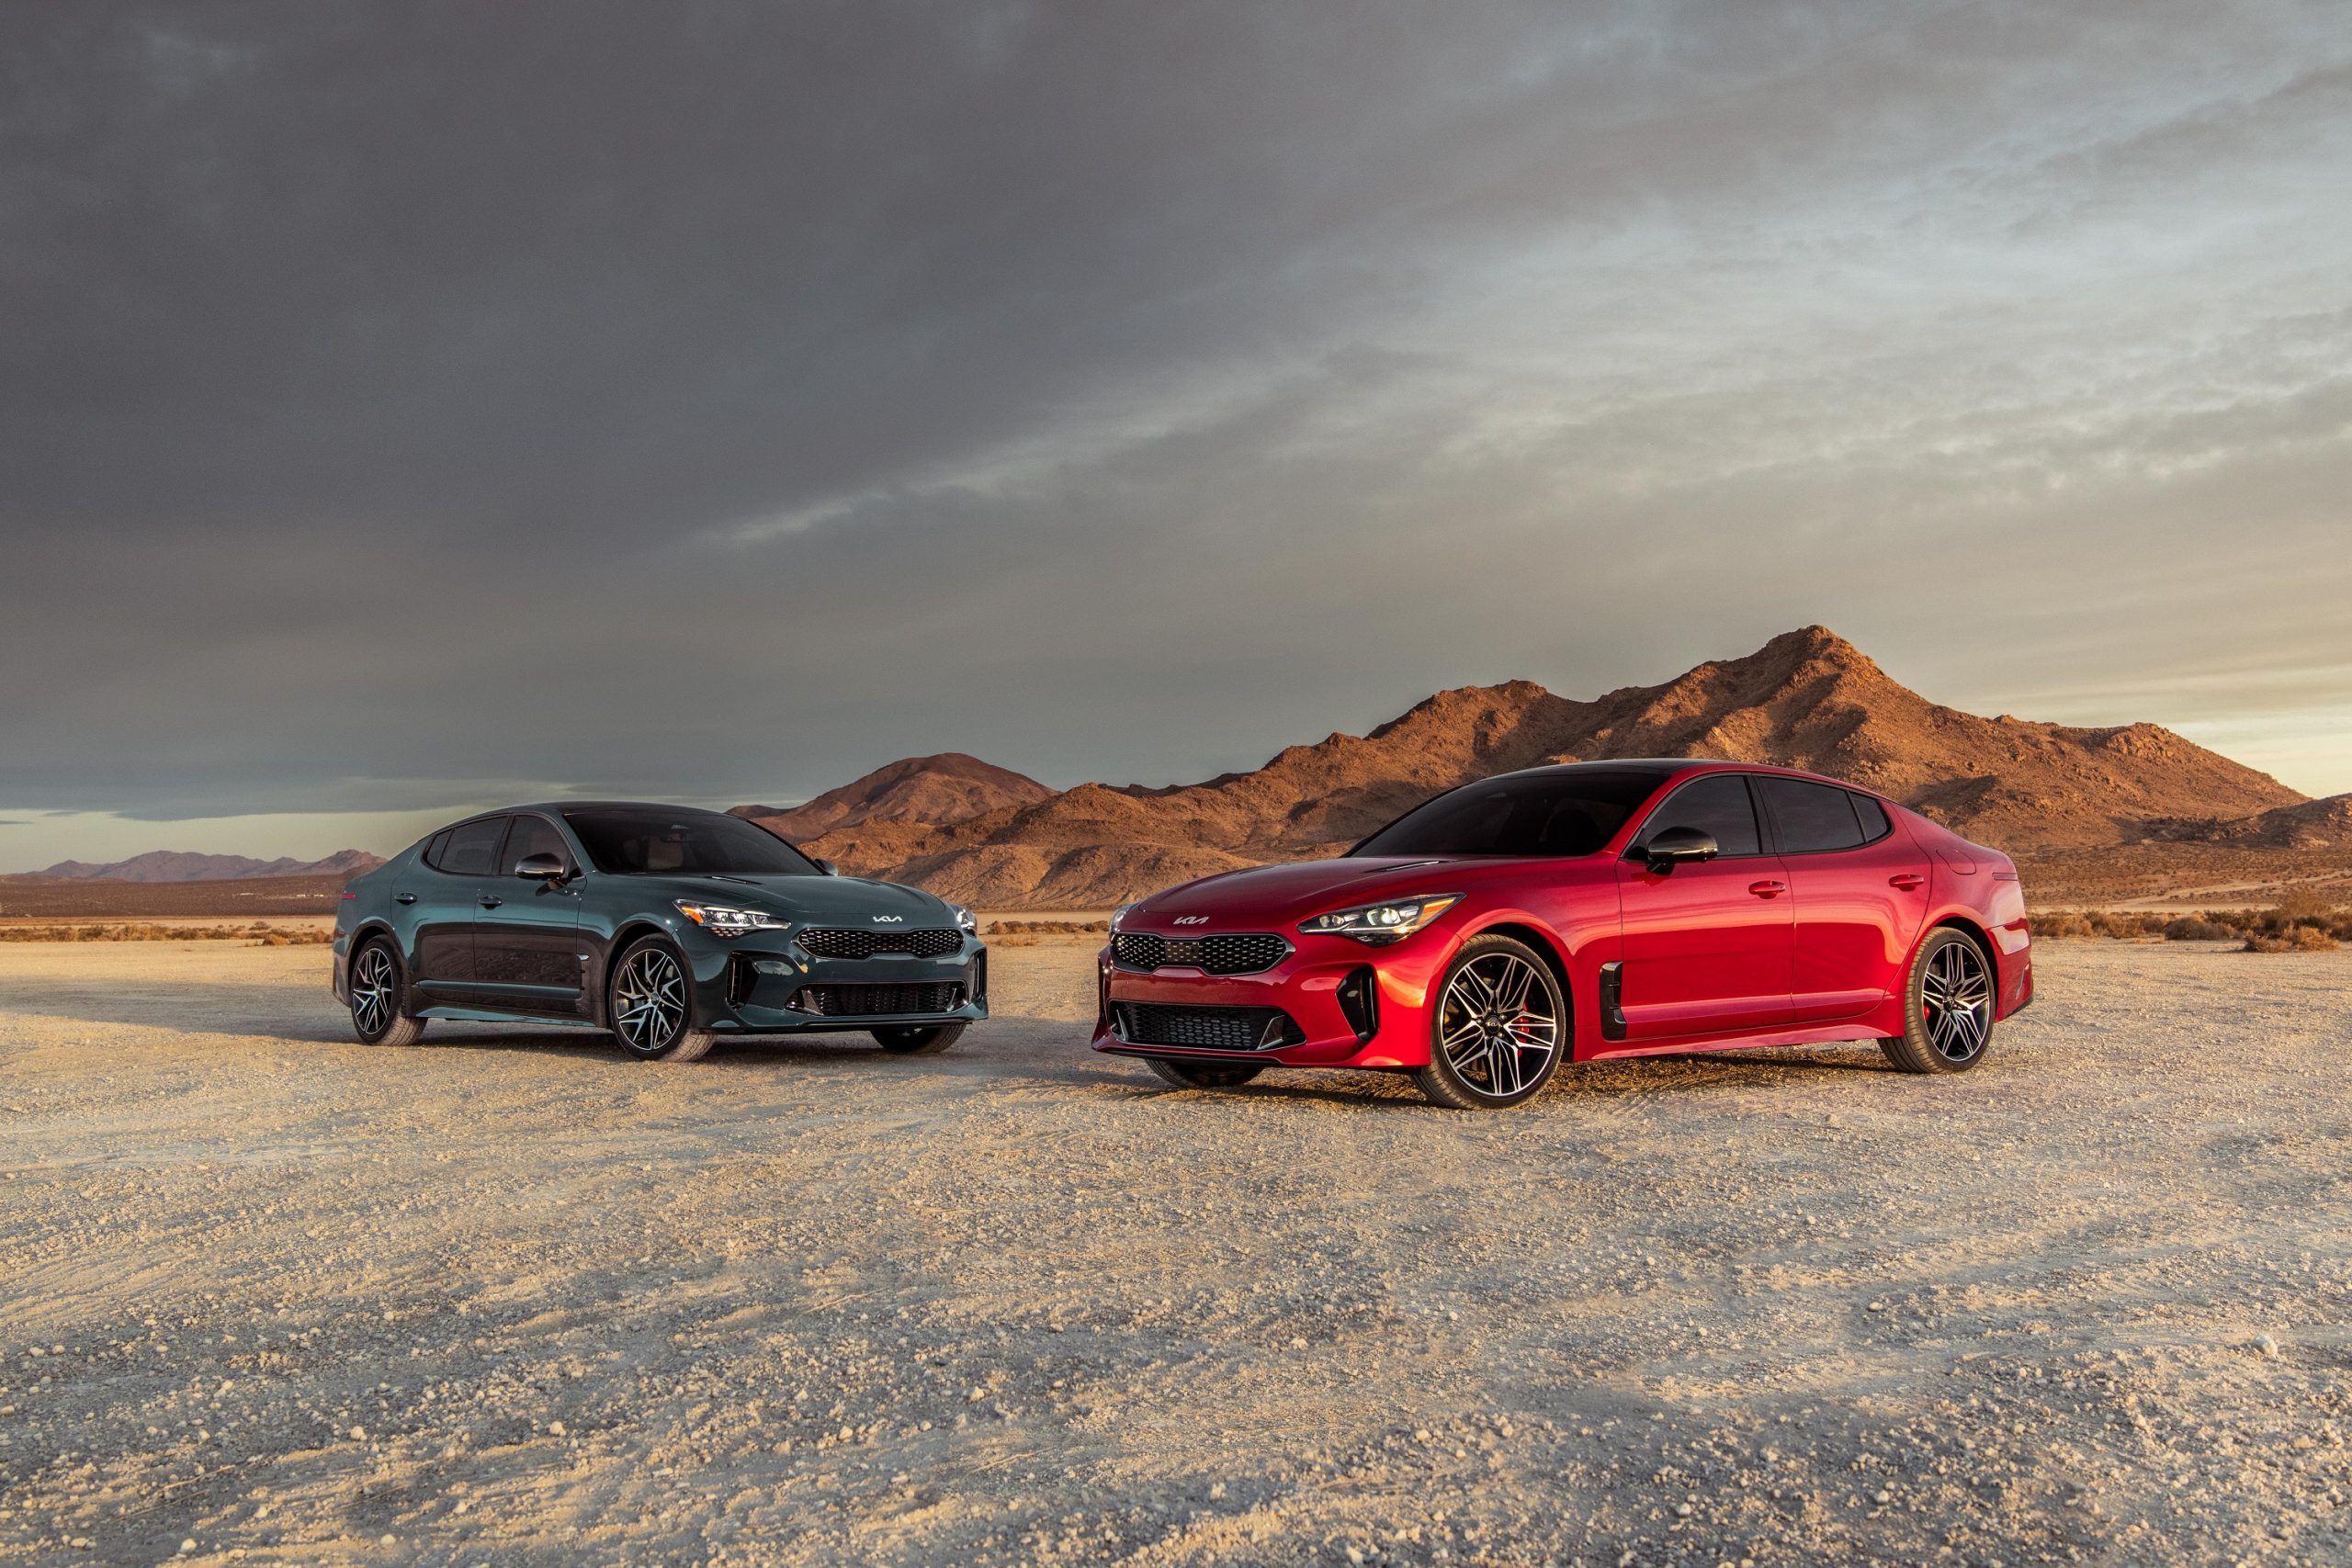 The 2022 Kia Stinger and Stinger GT sports sedan in black and red shot in the desert at sunset